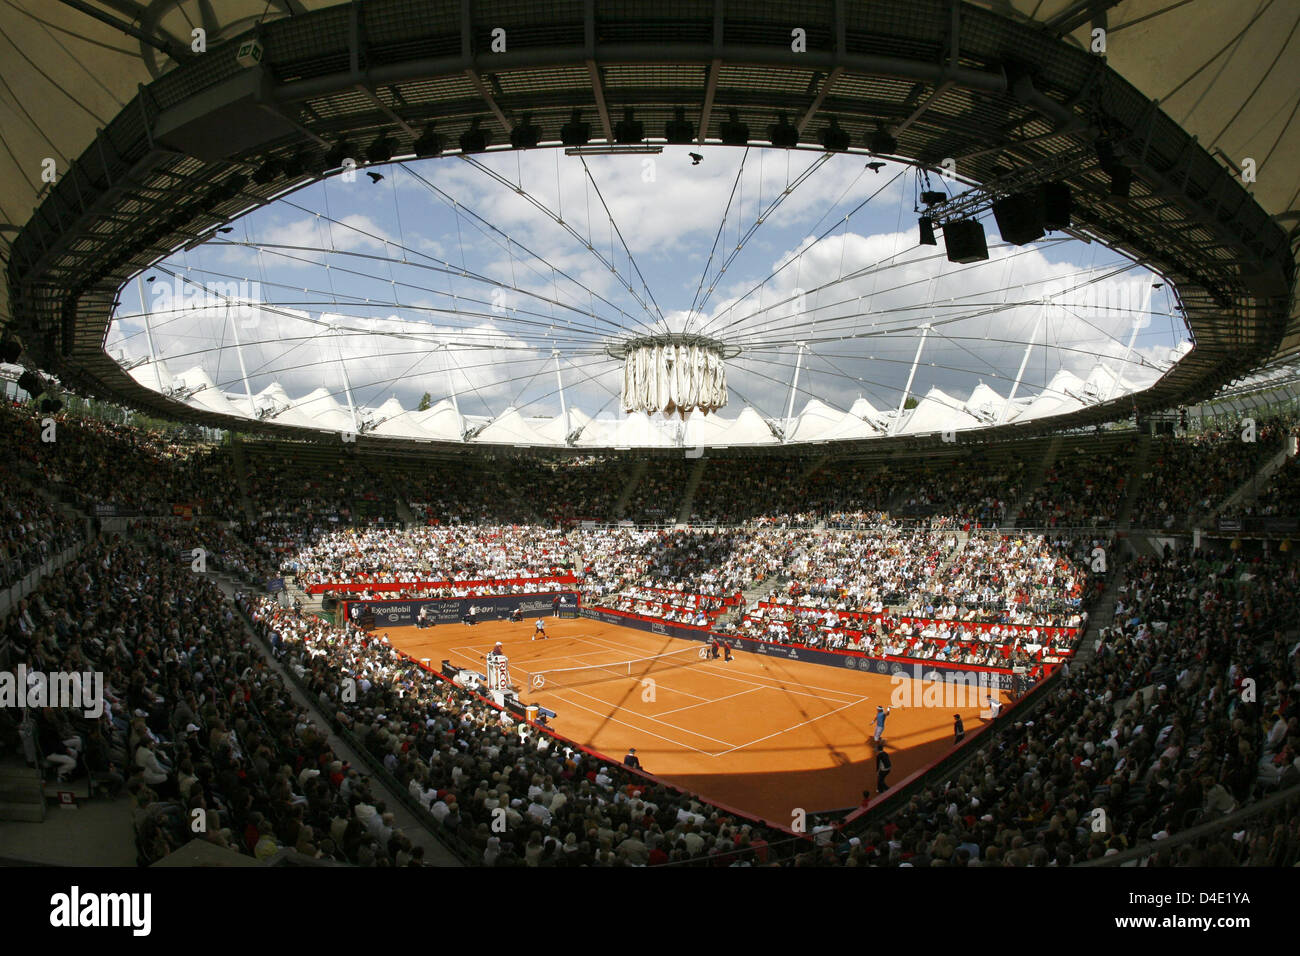 The picture shows the tennis stadium 'Am Rothenbaum' during the ATP Masters  Series final match between Swiss Federer and Spanish Nadal in Hamburg,  Germany, 18 May 2008. Photo: MAURIZIO GAMBARINI Stock Photo - Alamy